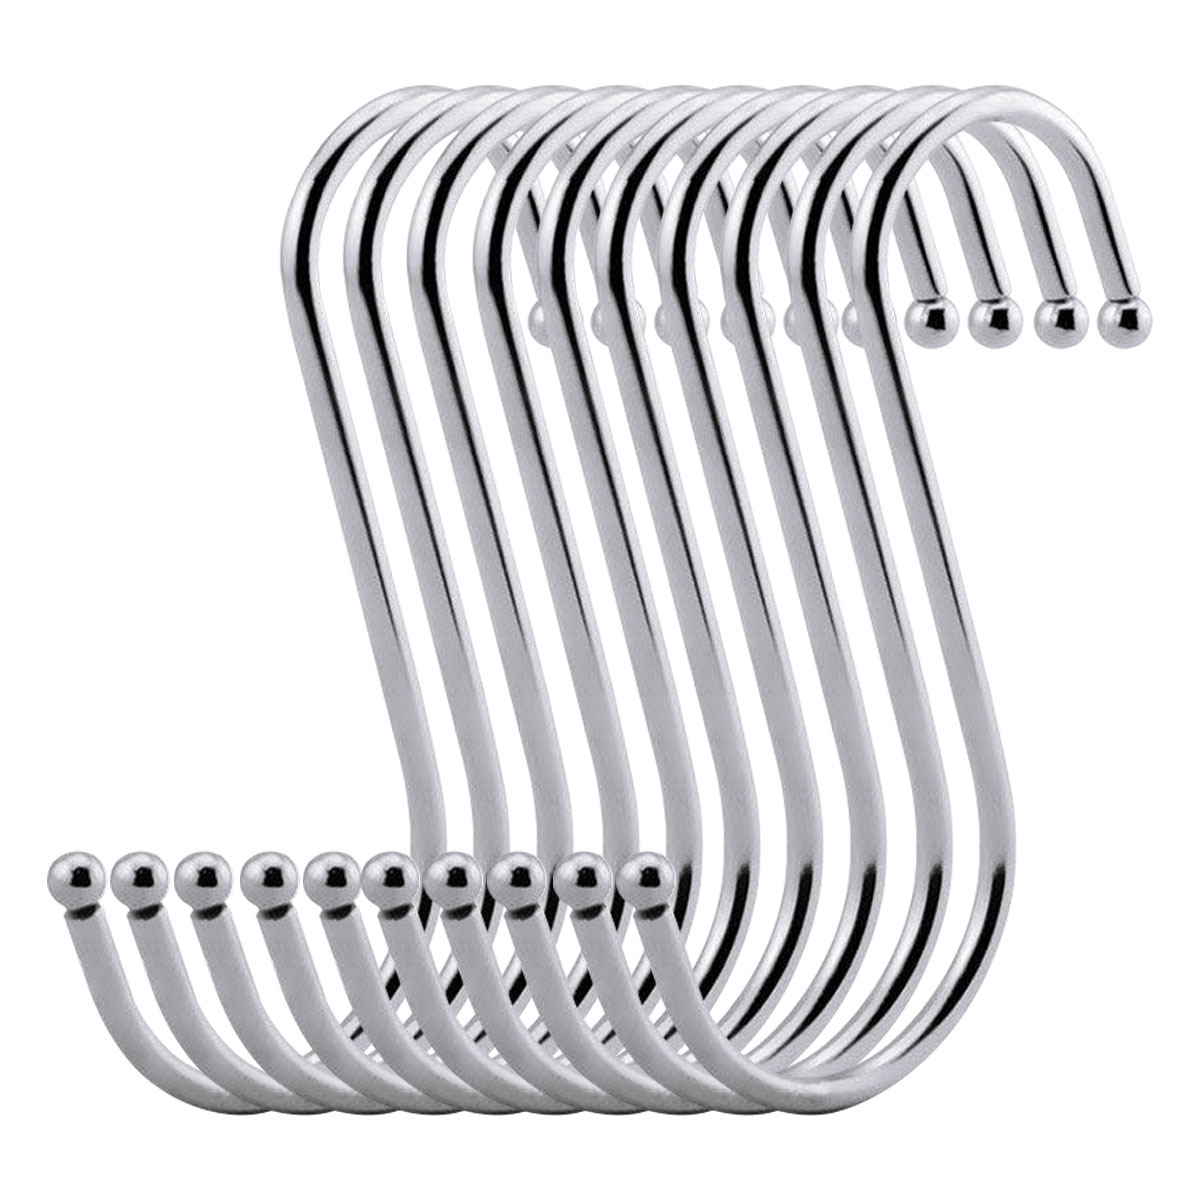 10pcs S Hooks Heavy Duty 9cm/3.54in S Shaped Hooks Stainless Steel Hangers  S Hook Multi Purpose Large Metal Hook For Pans Pots Towels Clothes Bags Pot